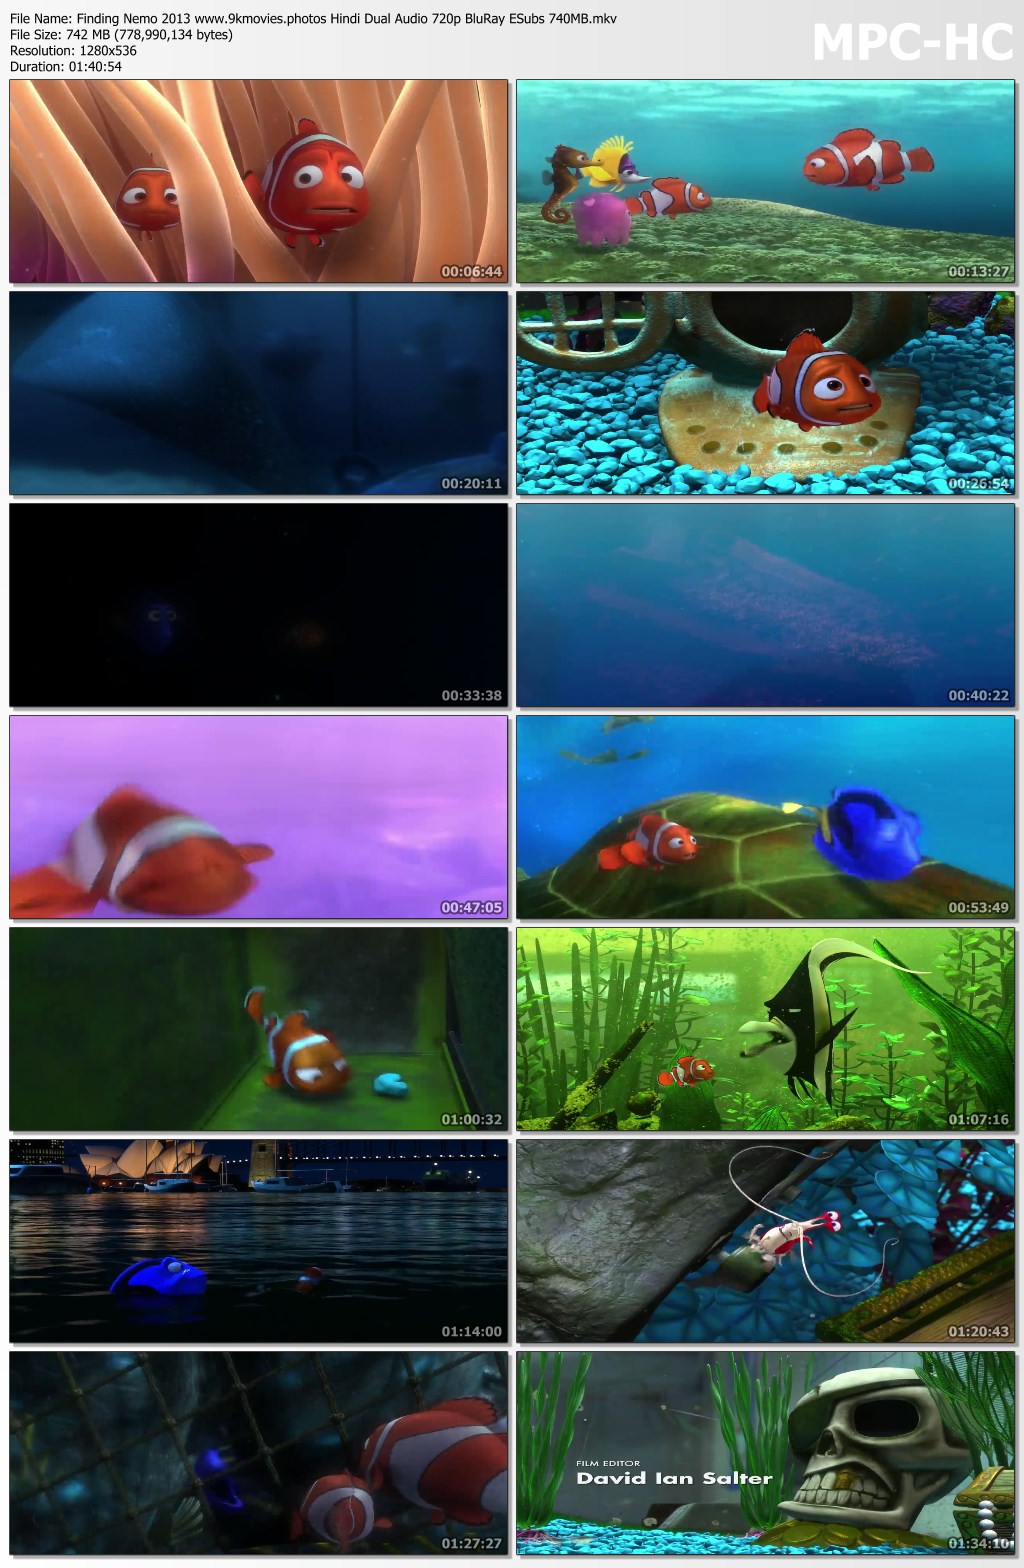 Finding nemo mp4 movie free download in hindi